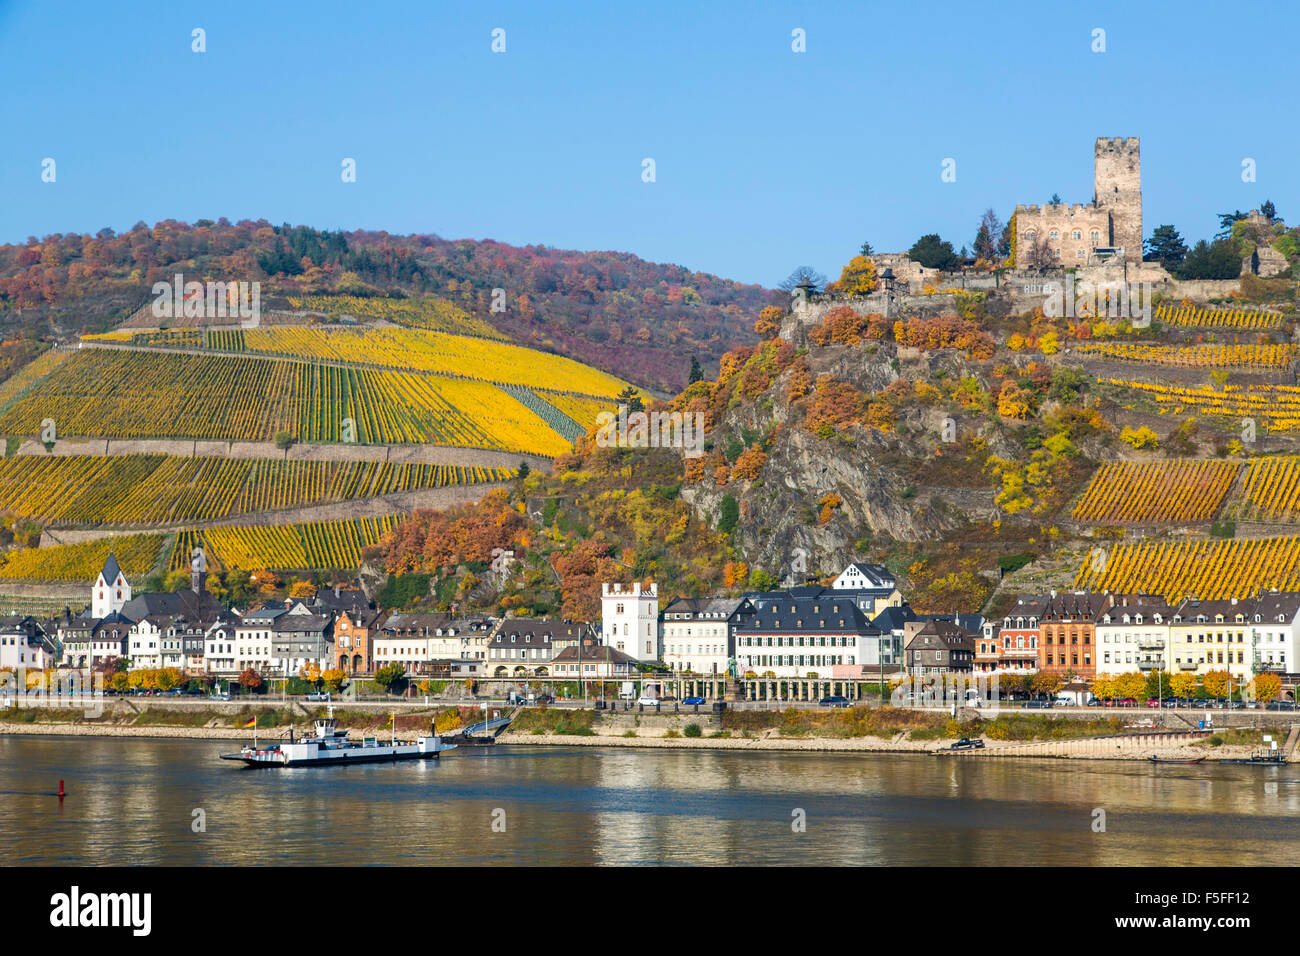 Gutenfels castle, above Kaub, Germany, Upper middle Rhine valley, car ferry, vineyards, Stock Photo